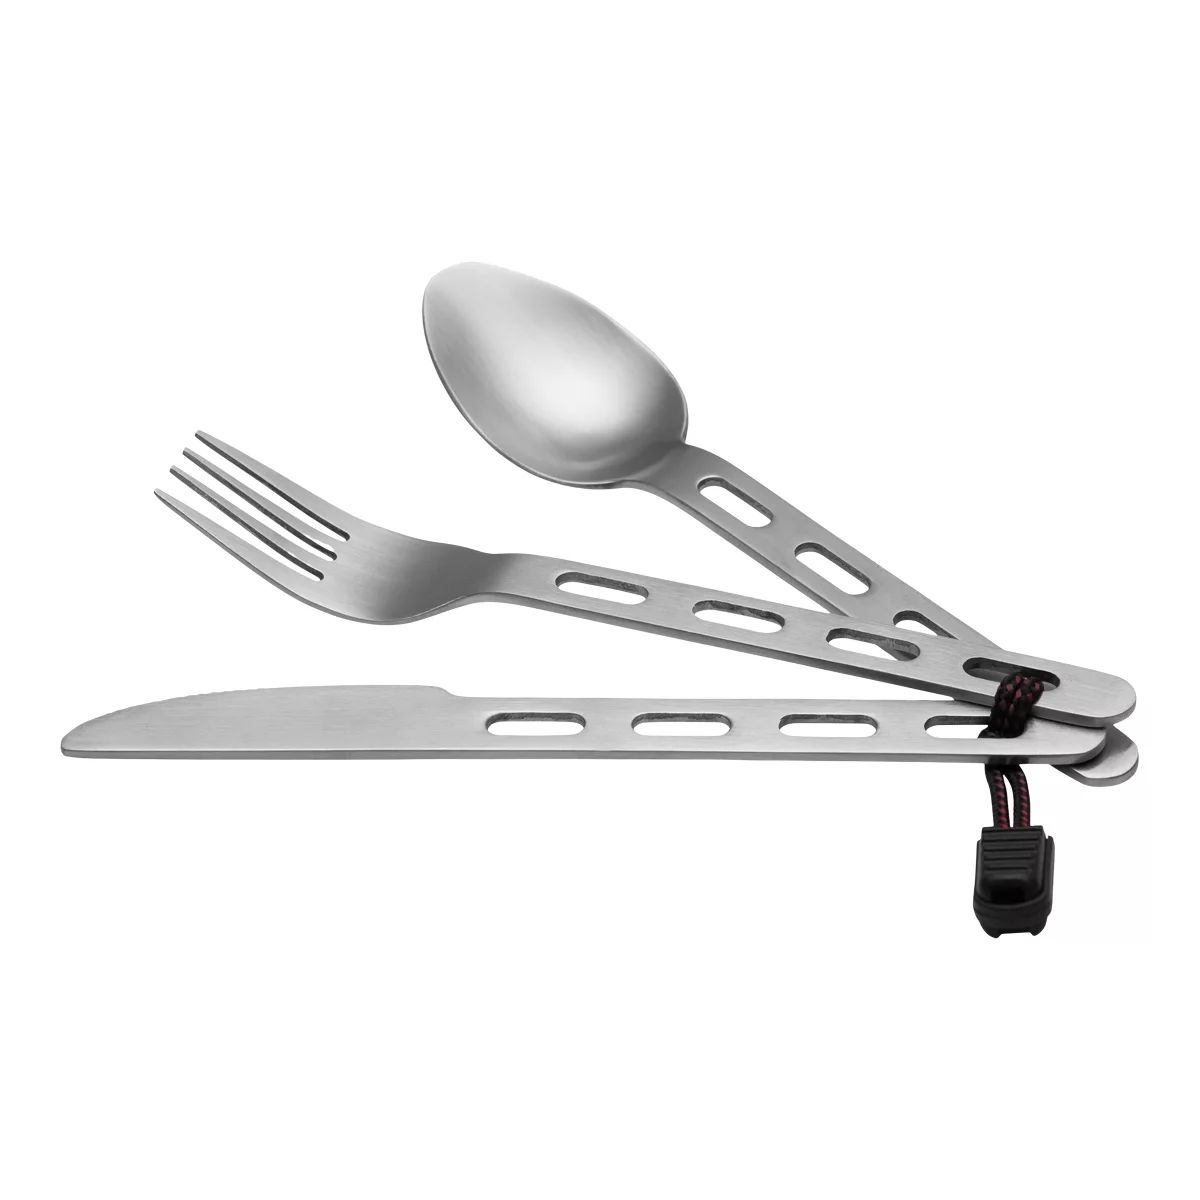 Image of McKINLEY 3-Piece Cutlery Set - Stainless